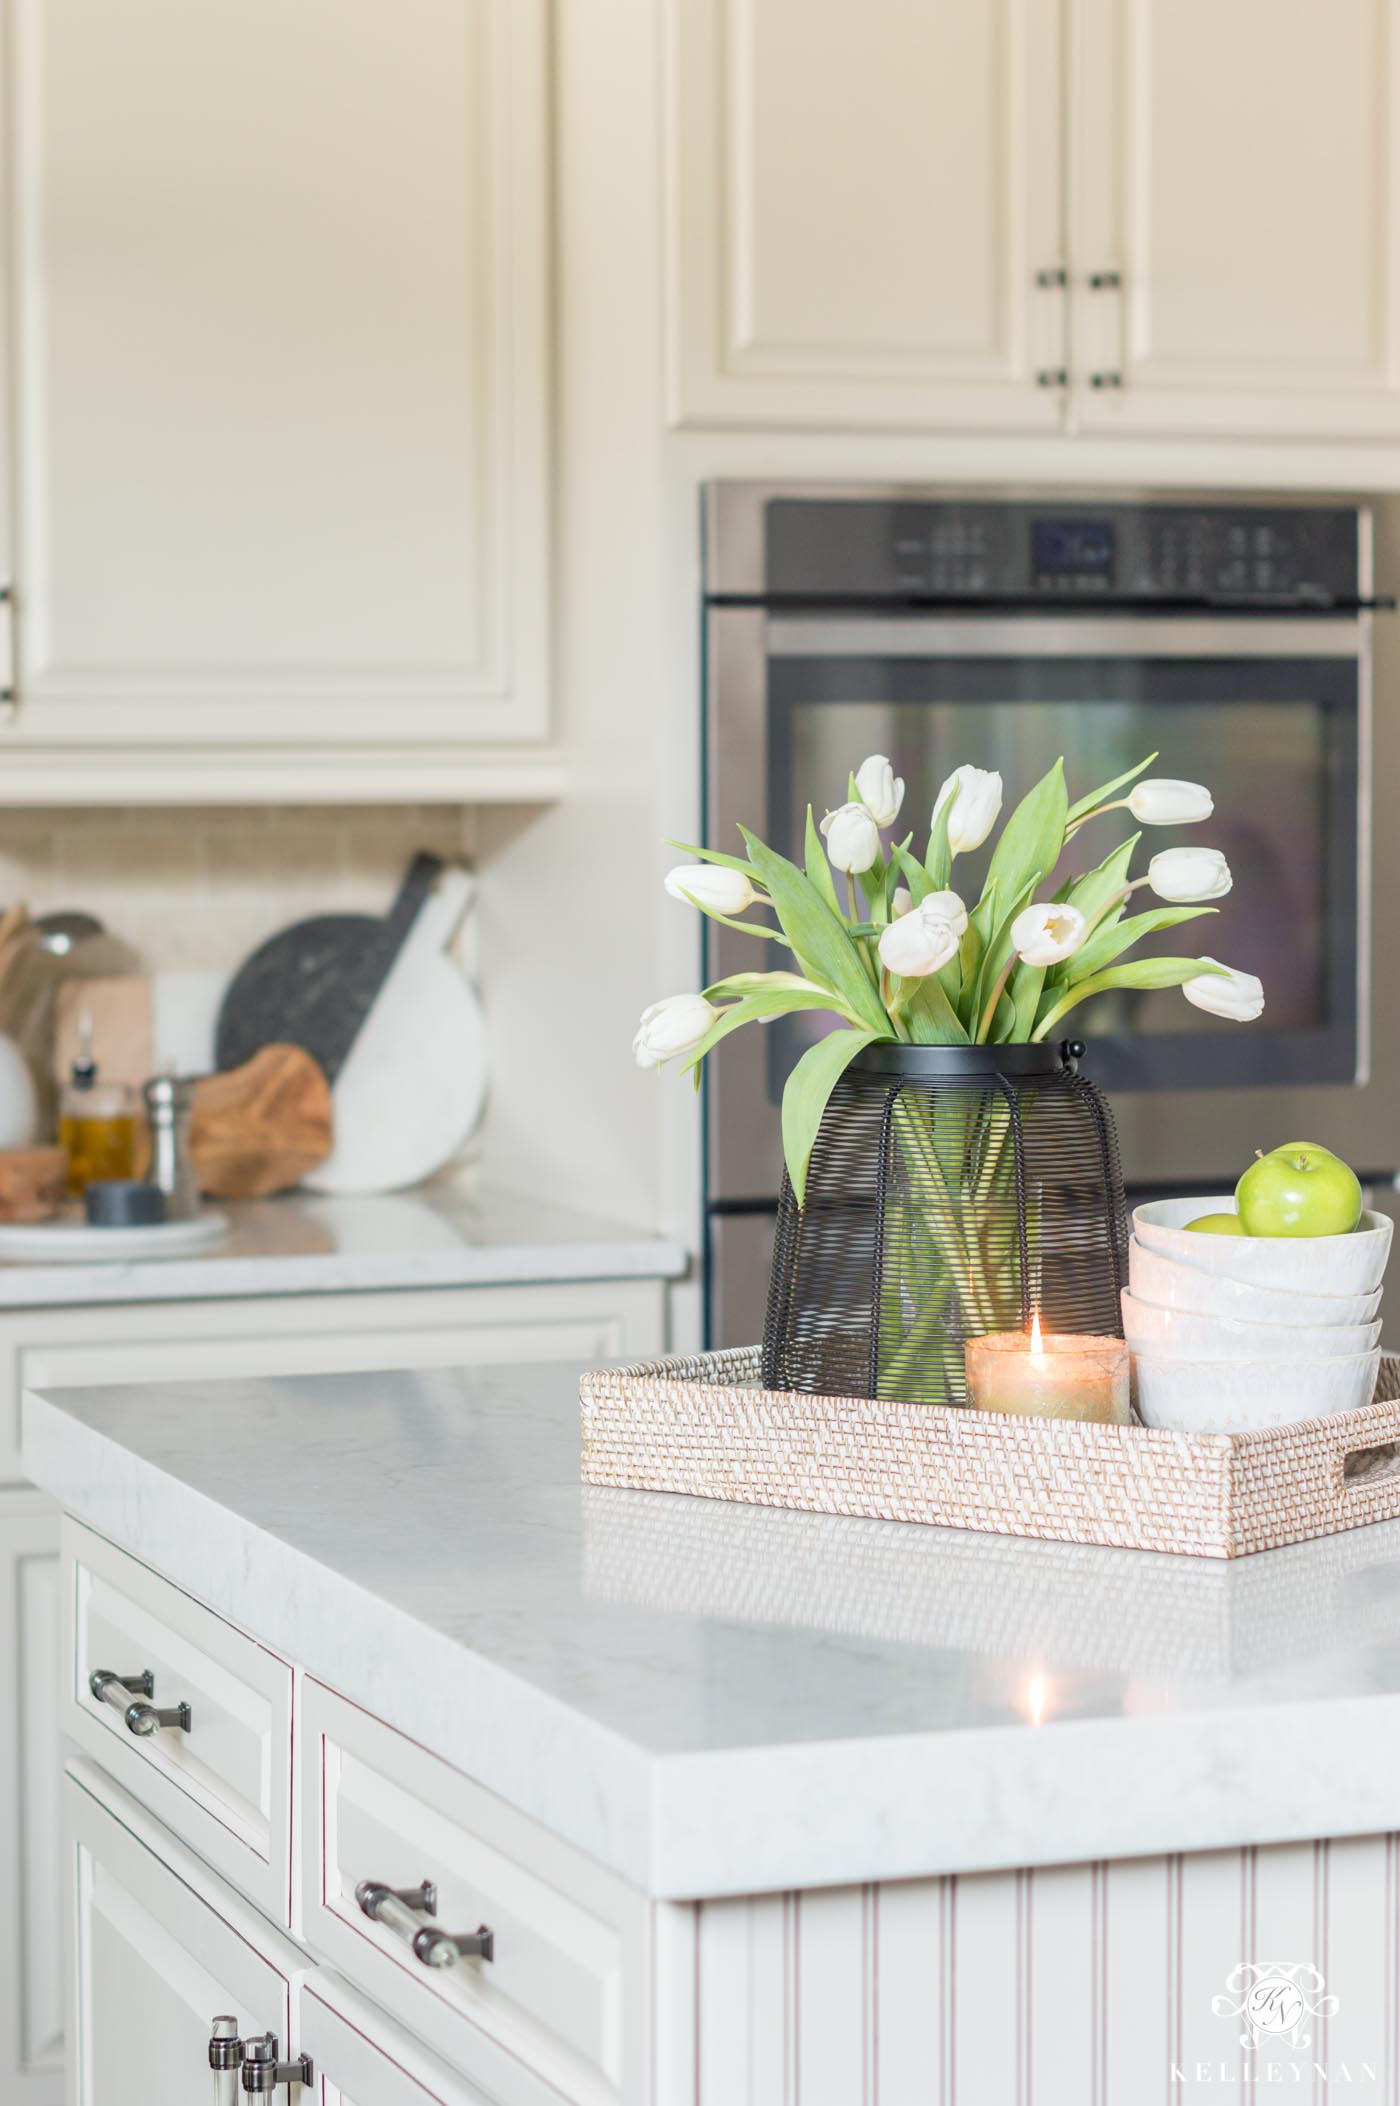 Spring kitchen decor and countertop styling ideas